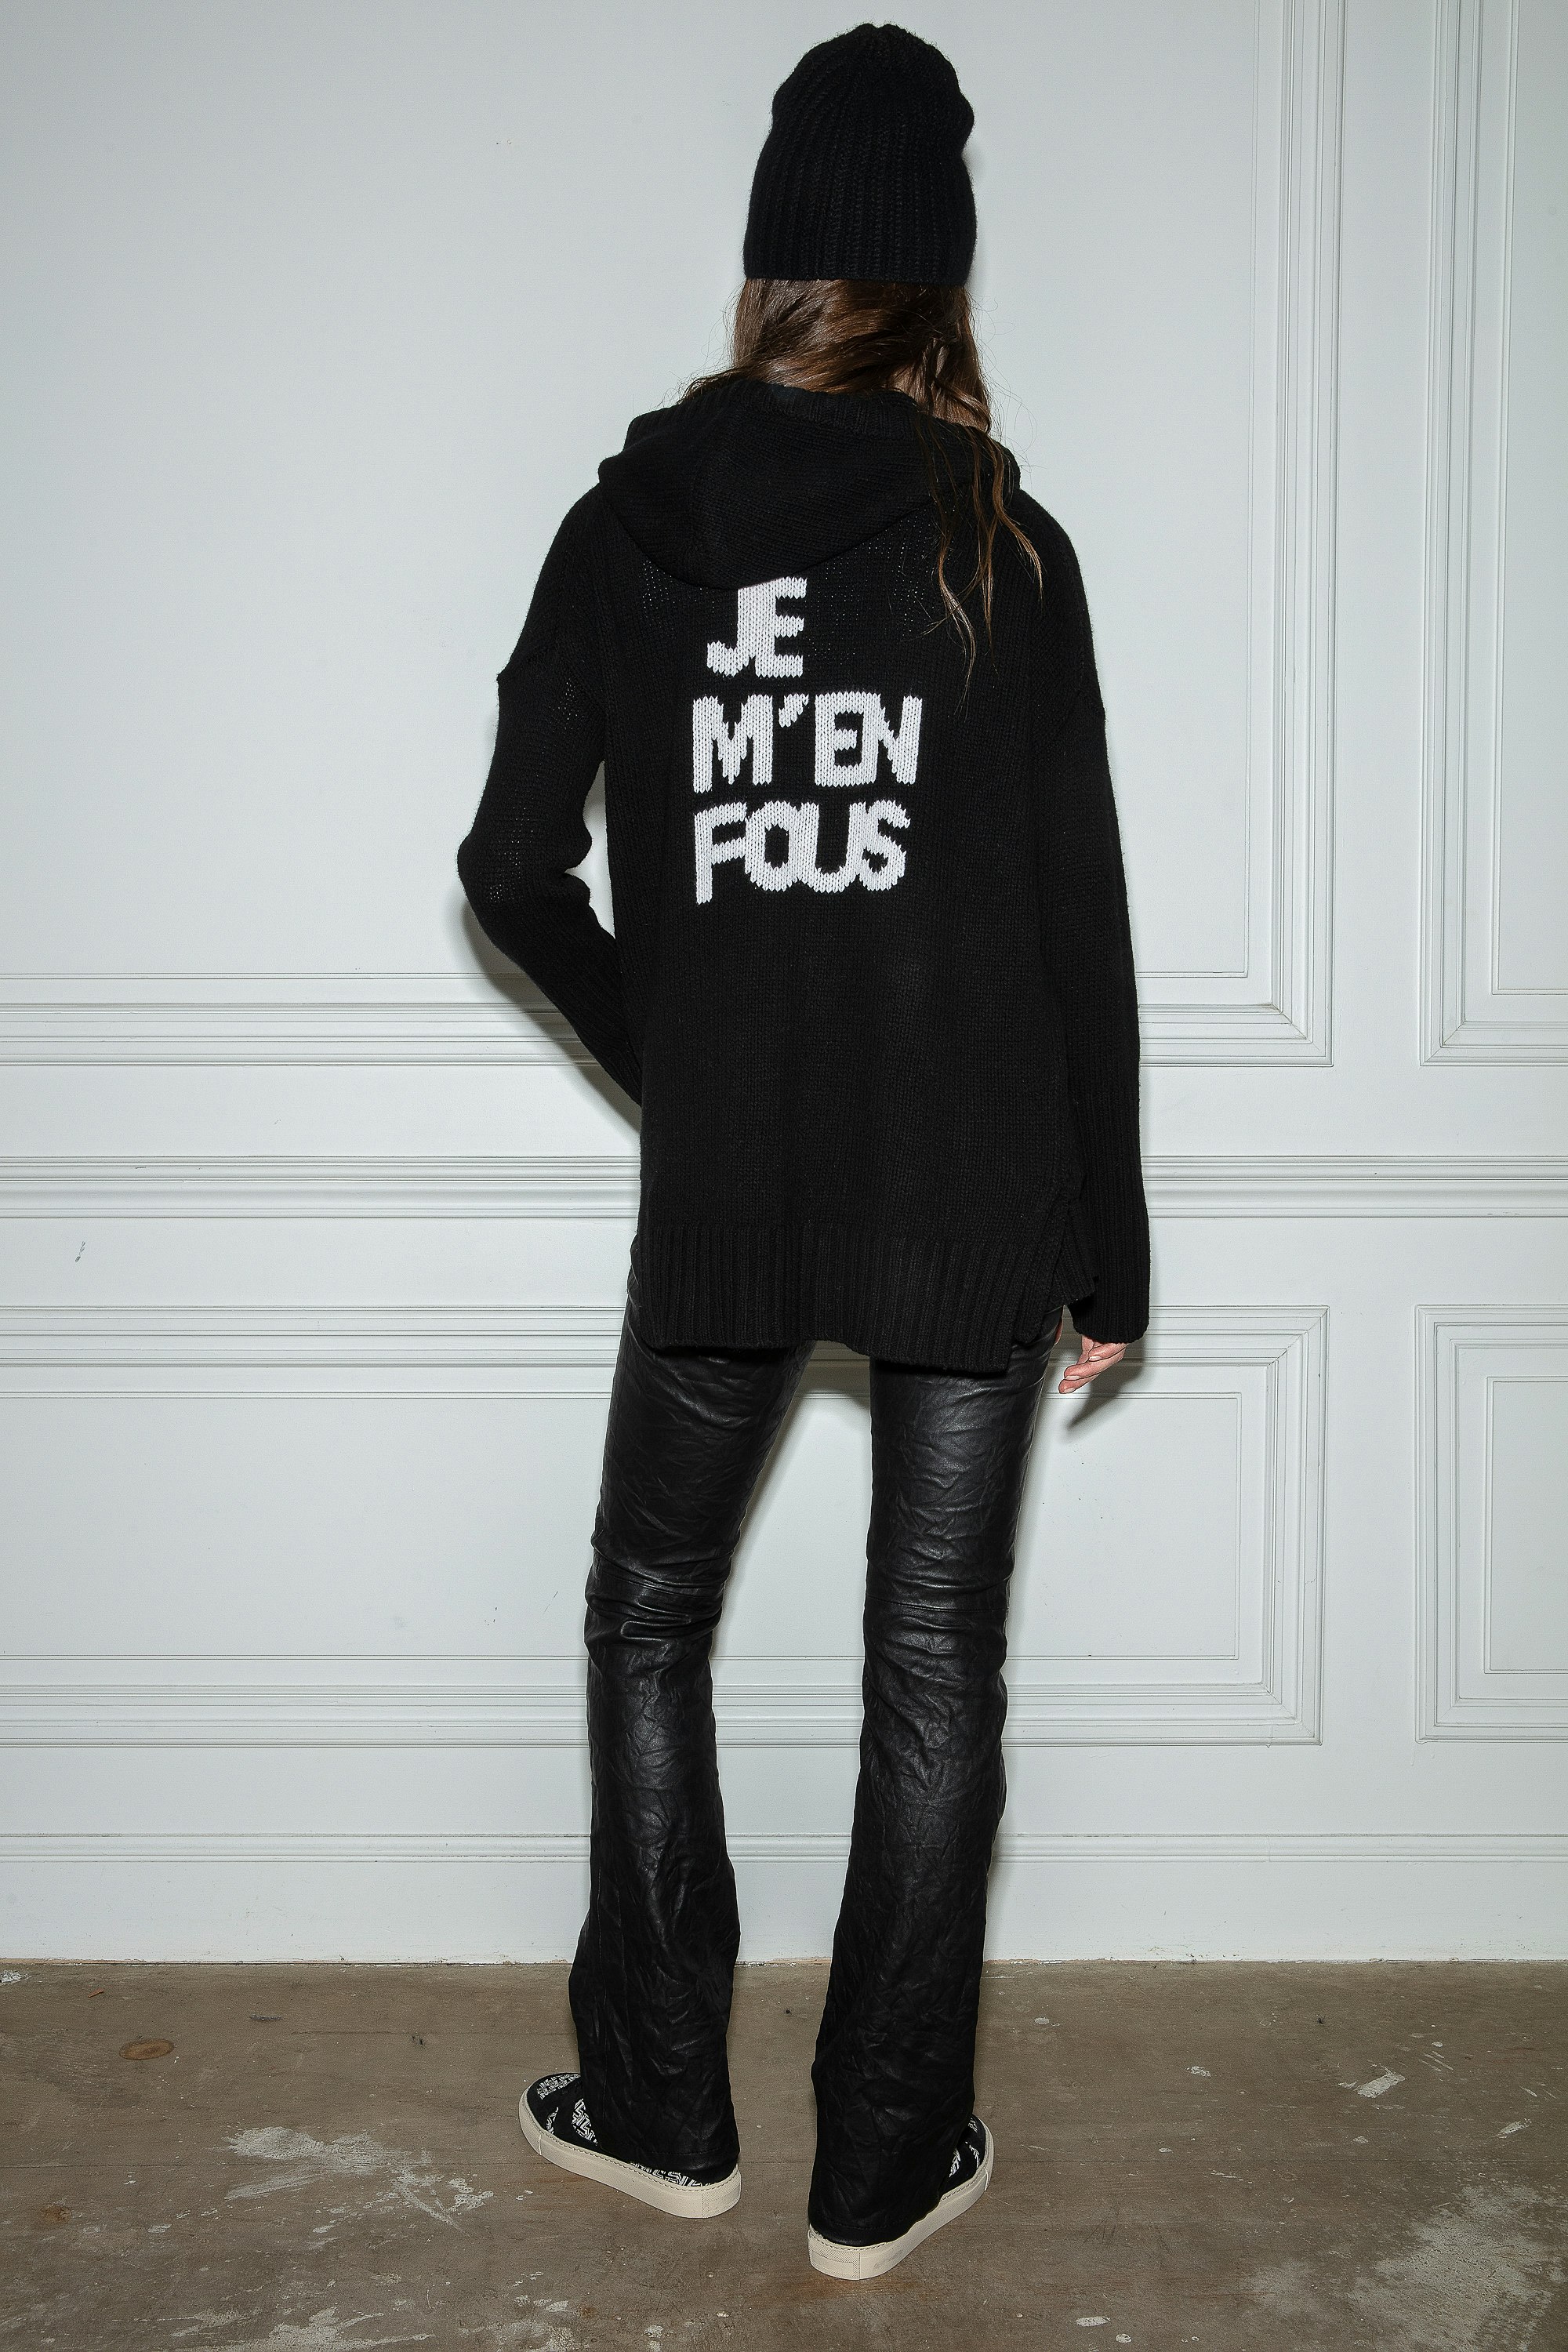 Salma We Amour カーディガン Women’s black knit cardigan with zip fastening and hood with the slogan “Je m’en fous” on the back